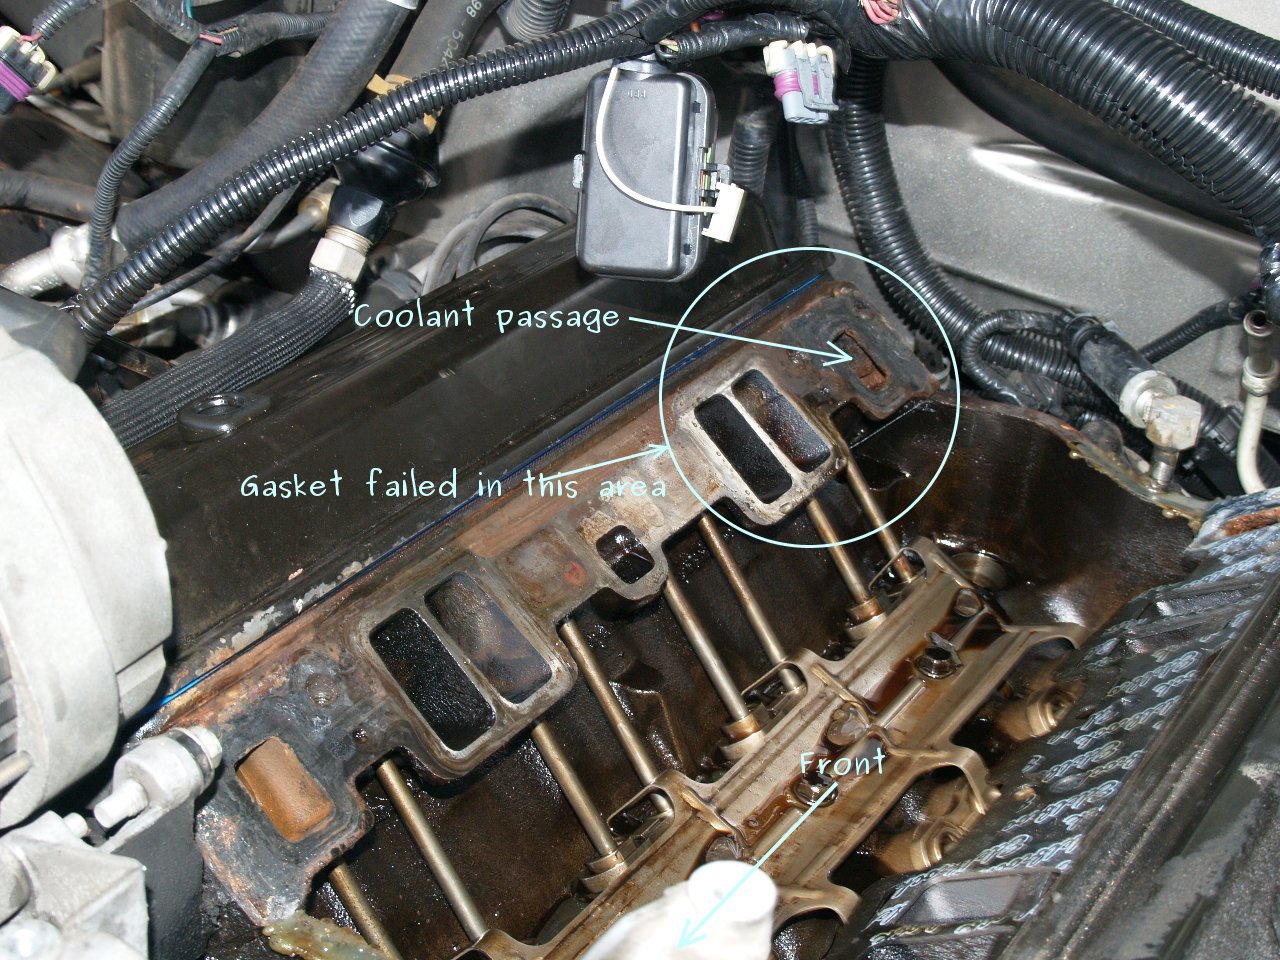 See P077E in engine